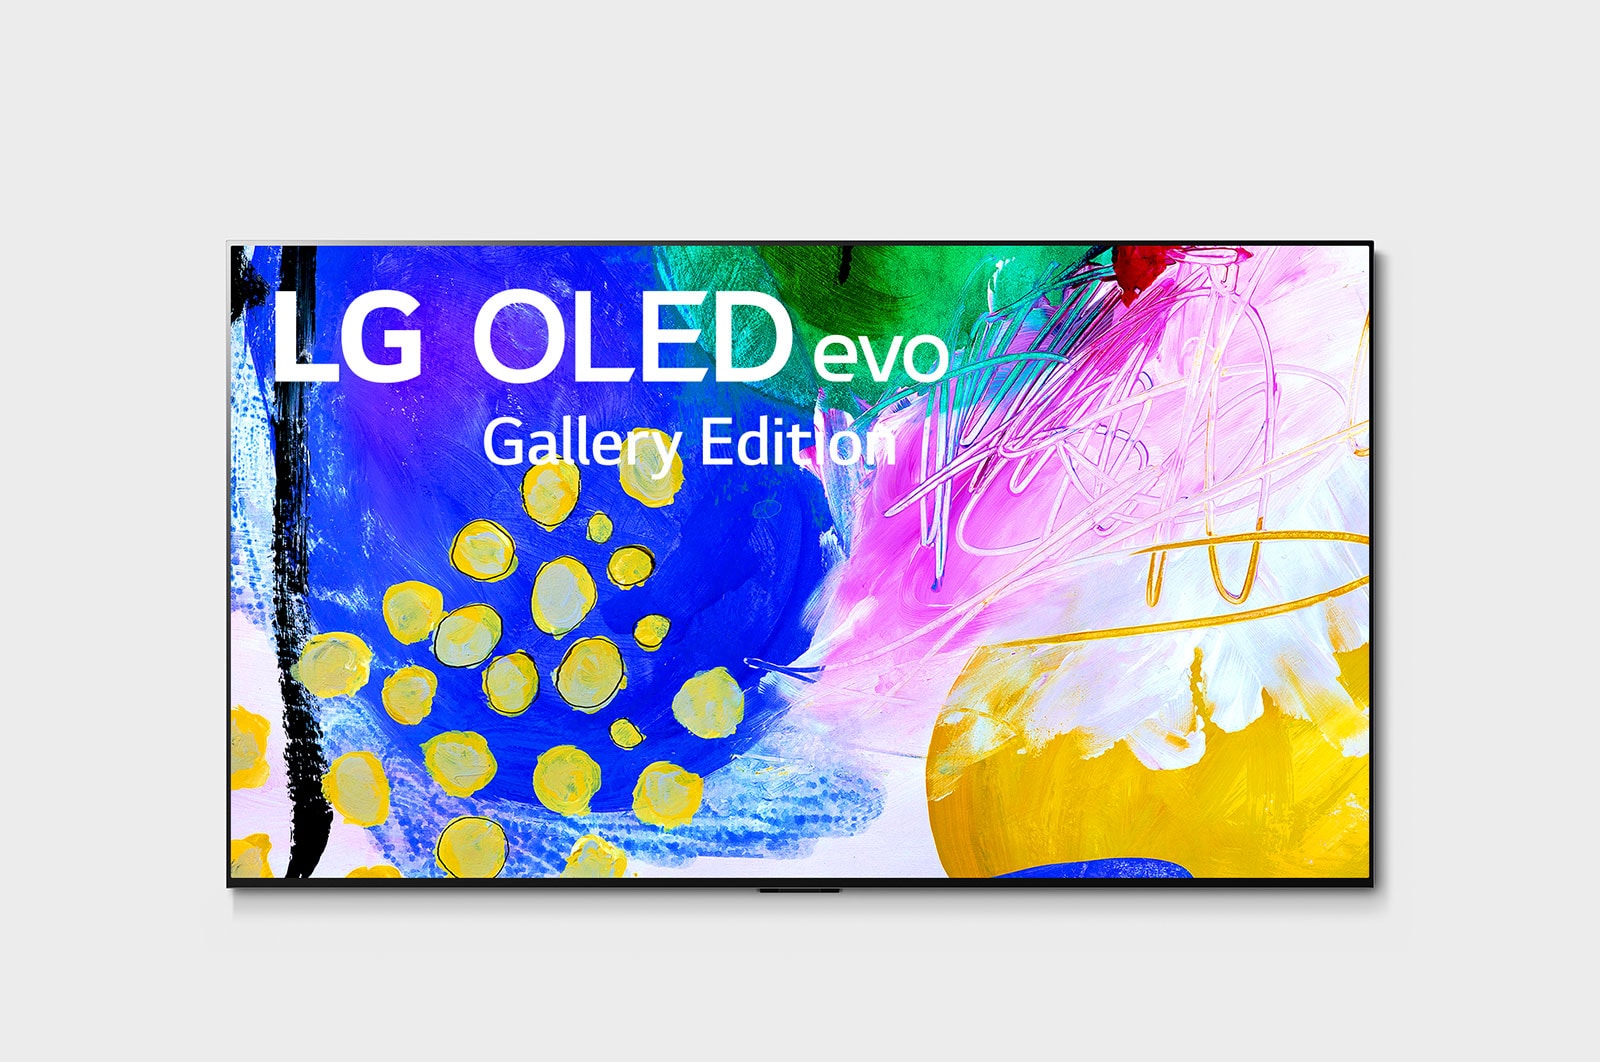 LG OLED evo TV 77 Inch G2 Series, Gallery Design, flush-fit wall mount ,4K Cinema HDR webOS Smart ThinQ AI Pixel Dimming - OLED77G26LA